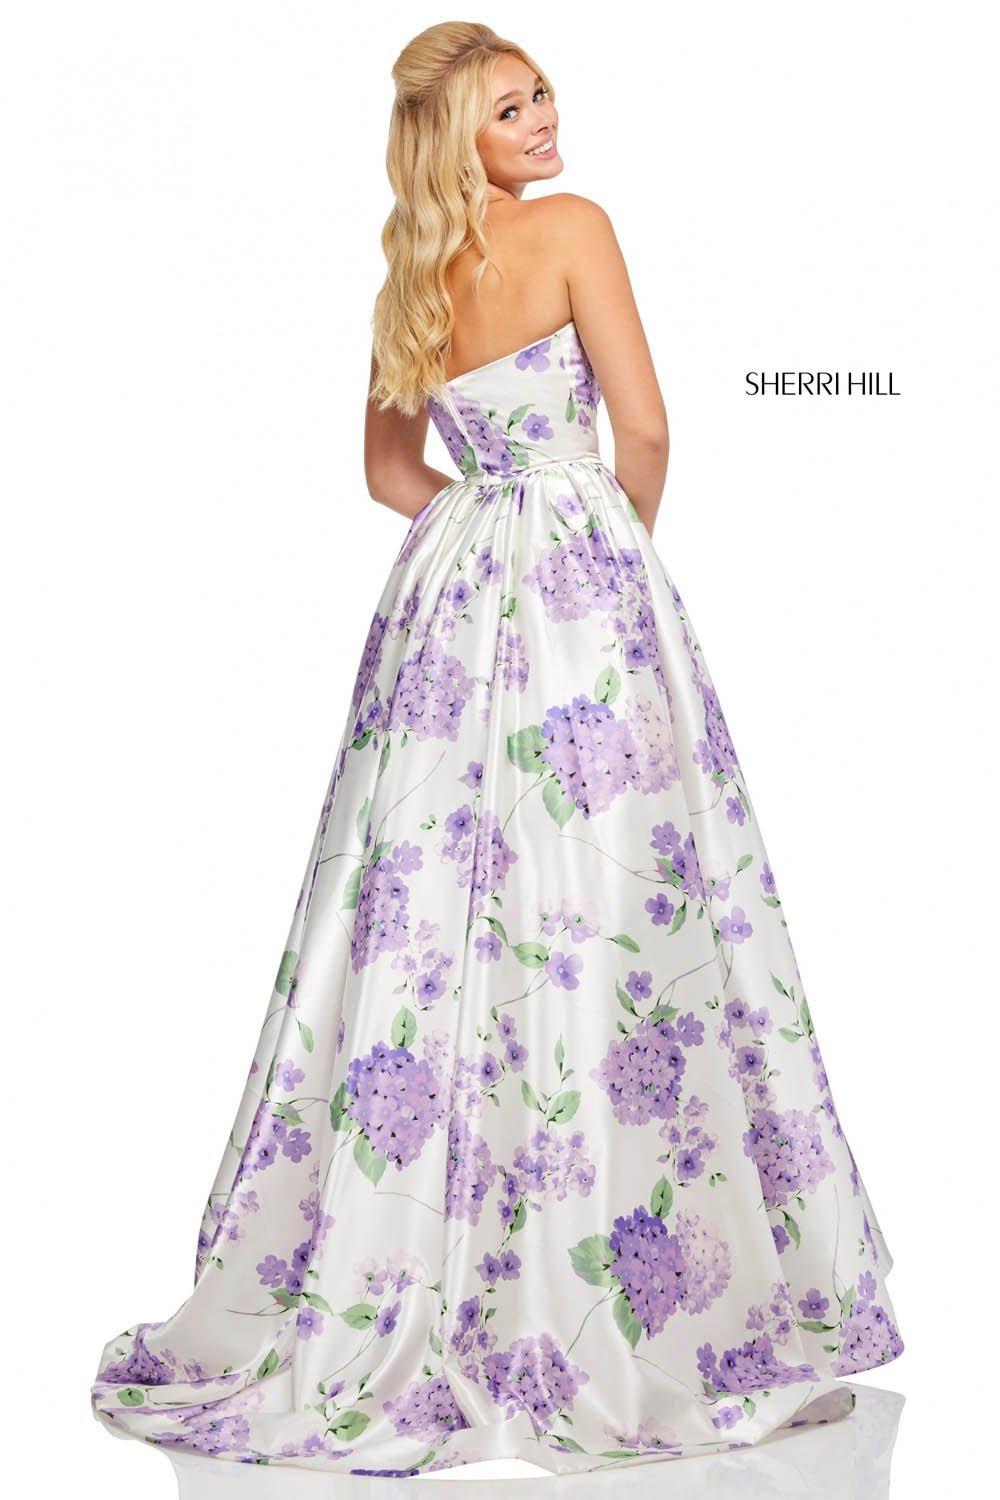 Sherri Hill 52723 dress images in these colors: Ivory Lilac Print, Ivory Pink Print.